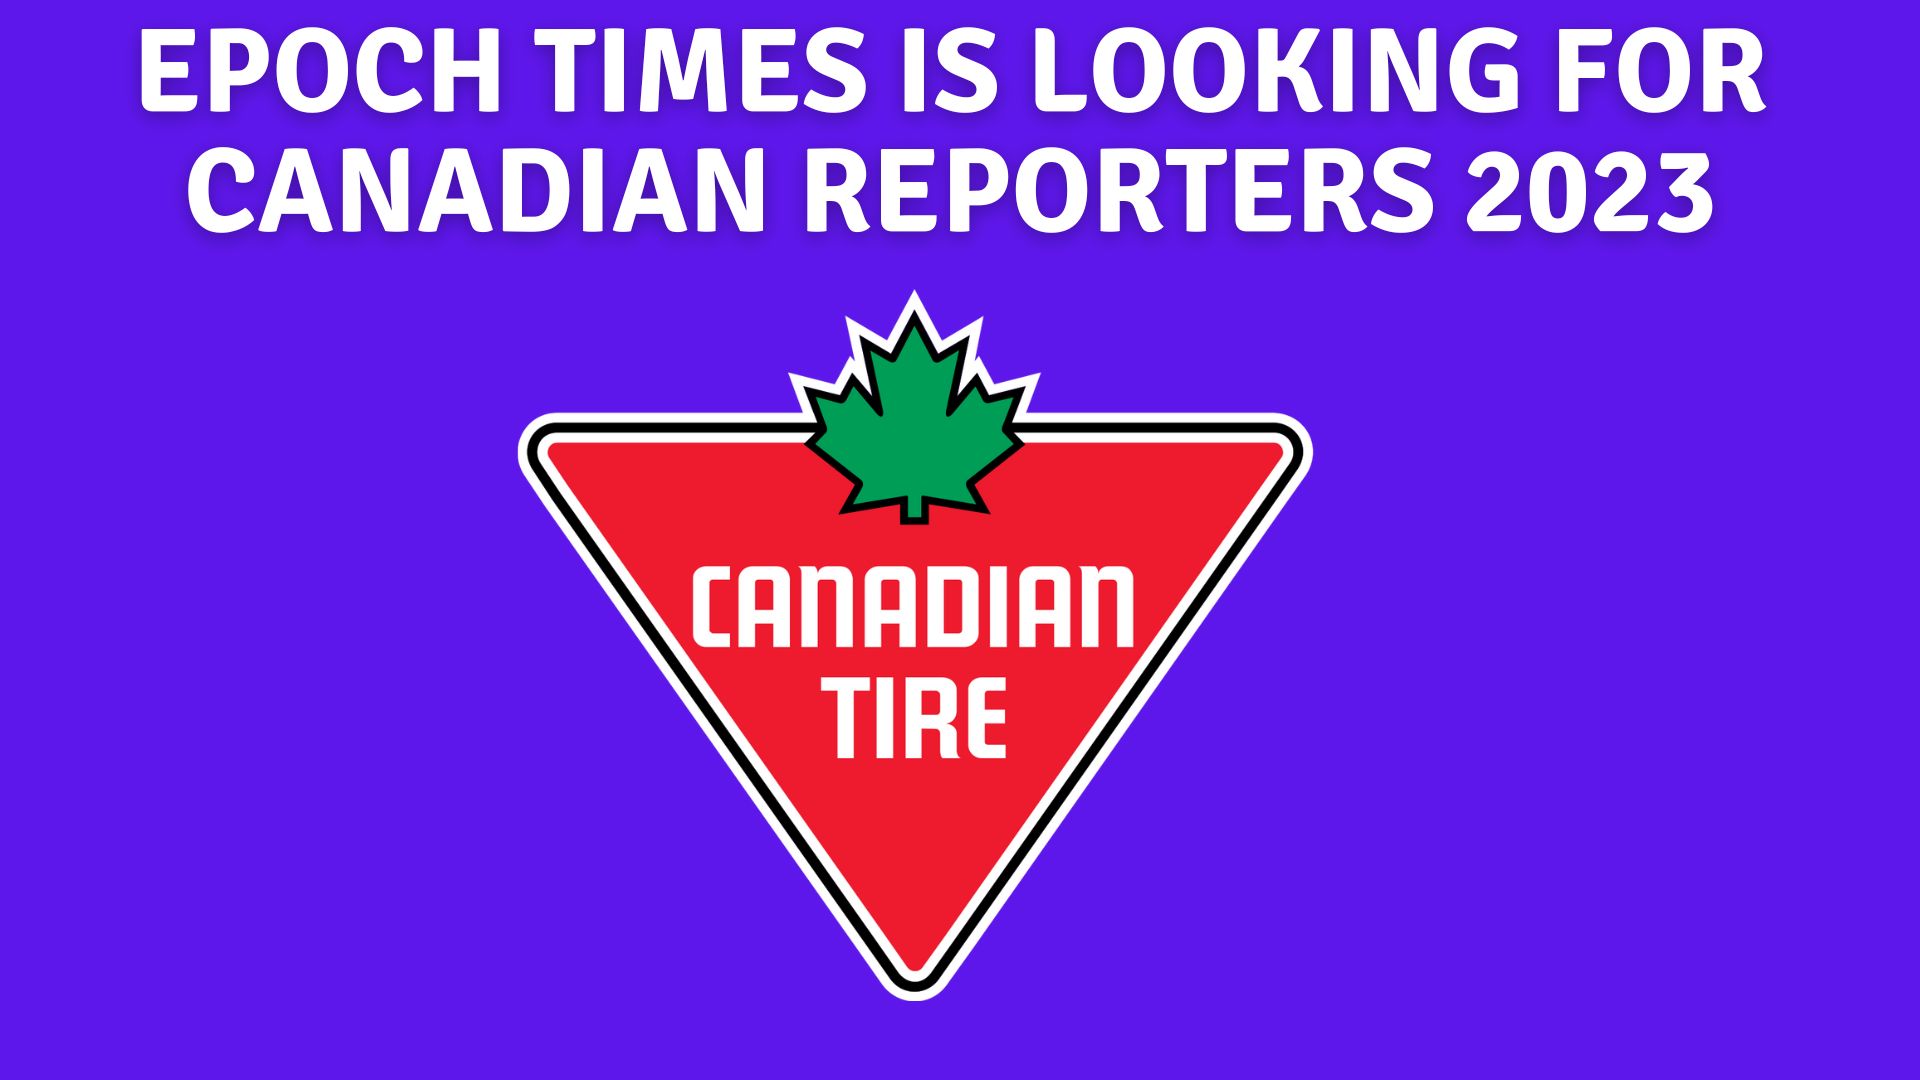 Epoch times is looking for canadian reporters 2023